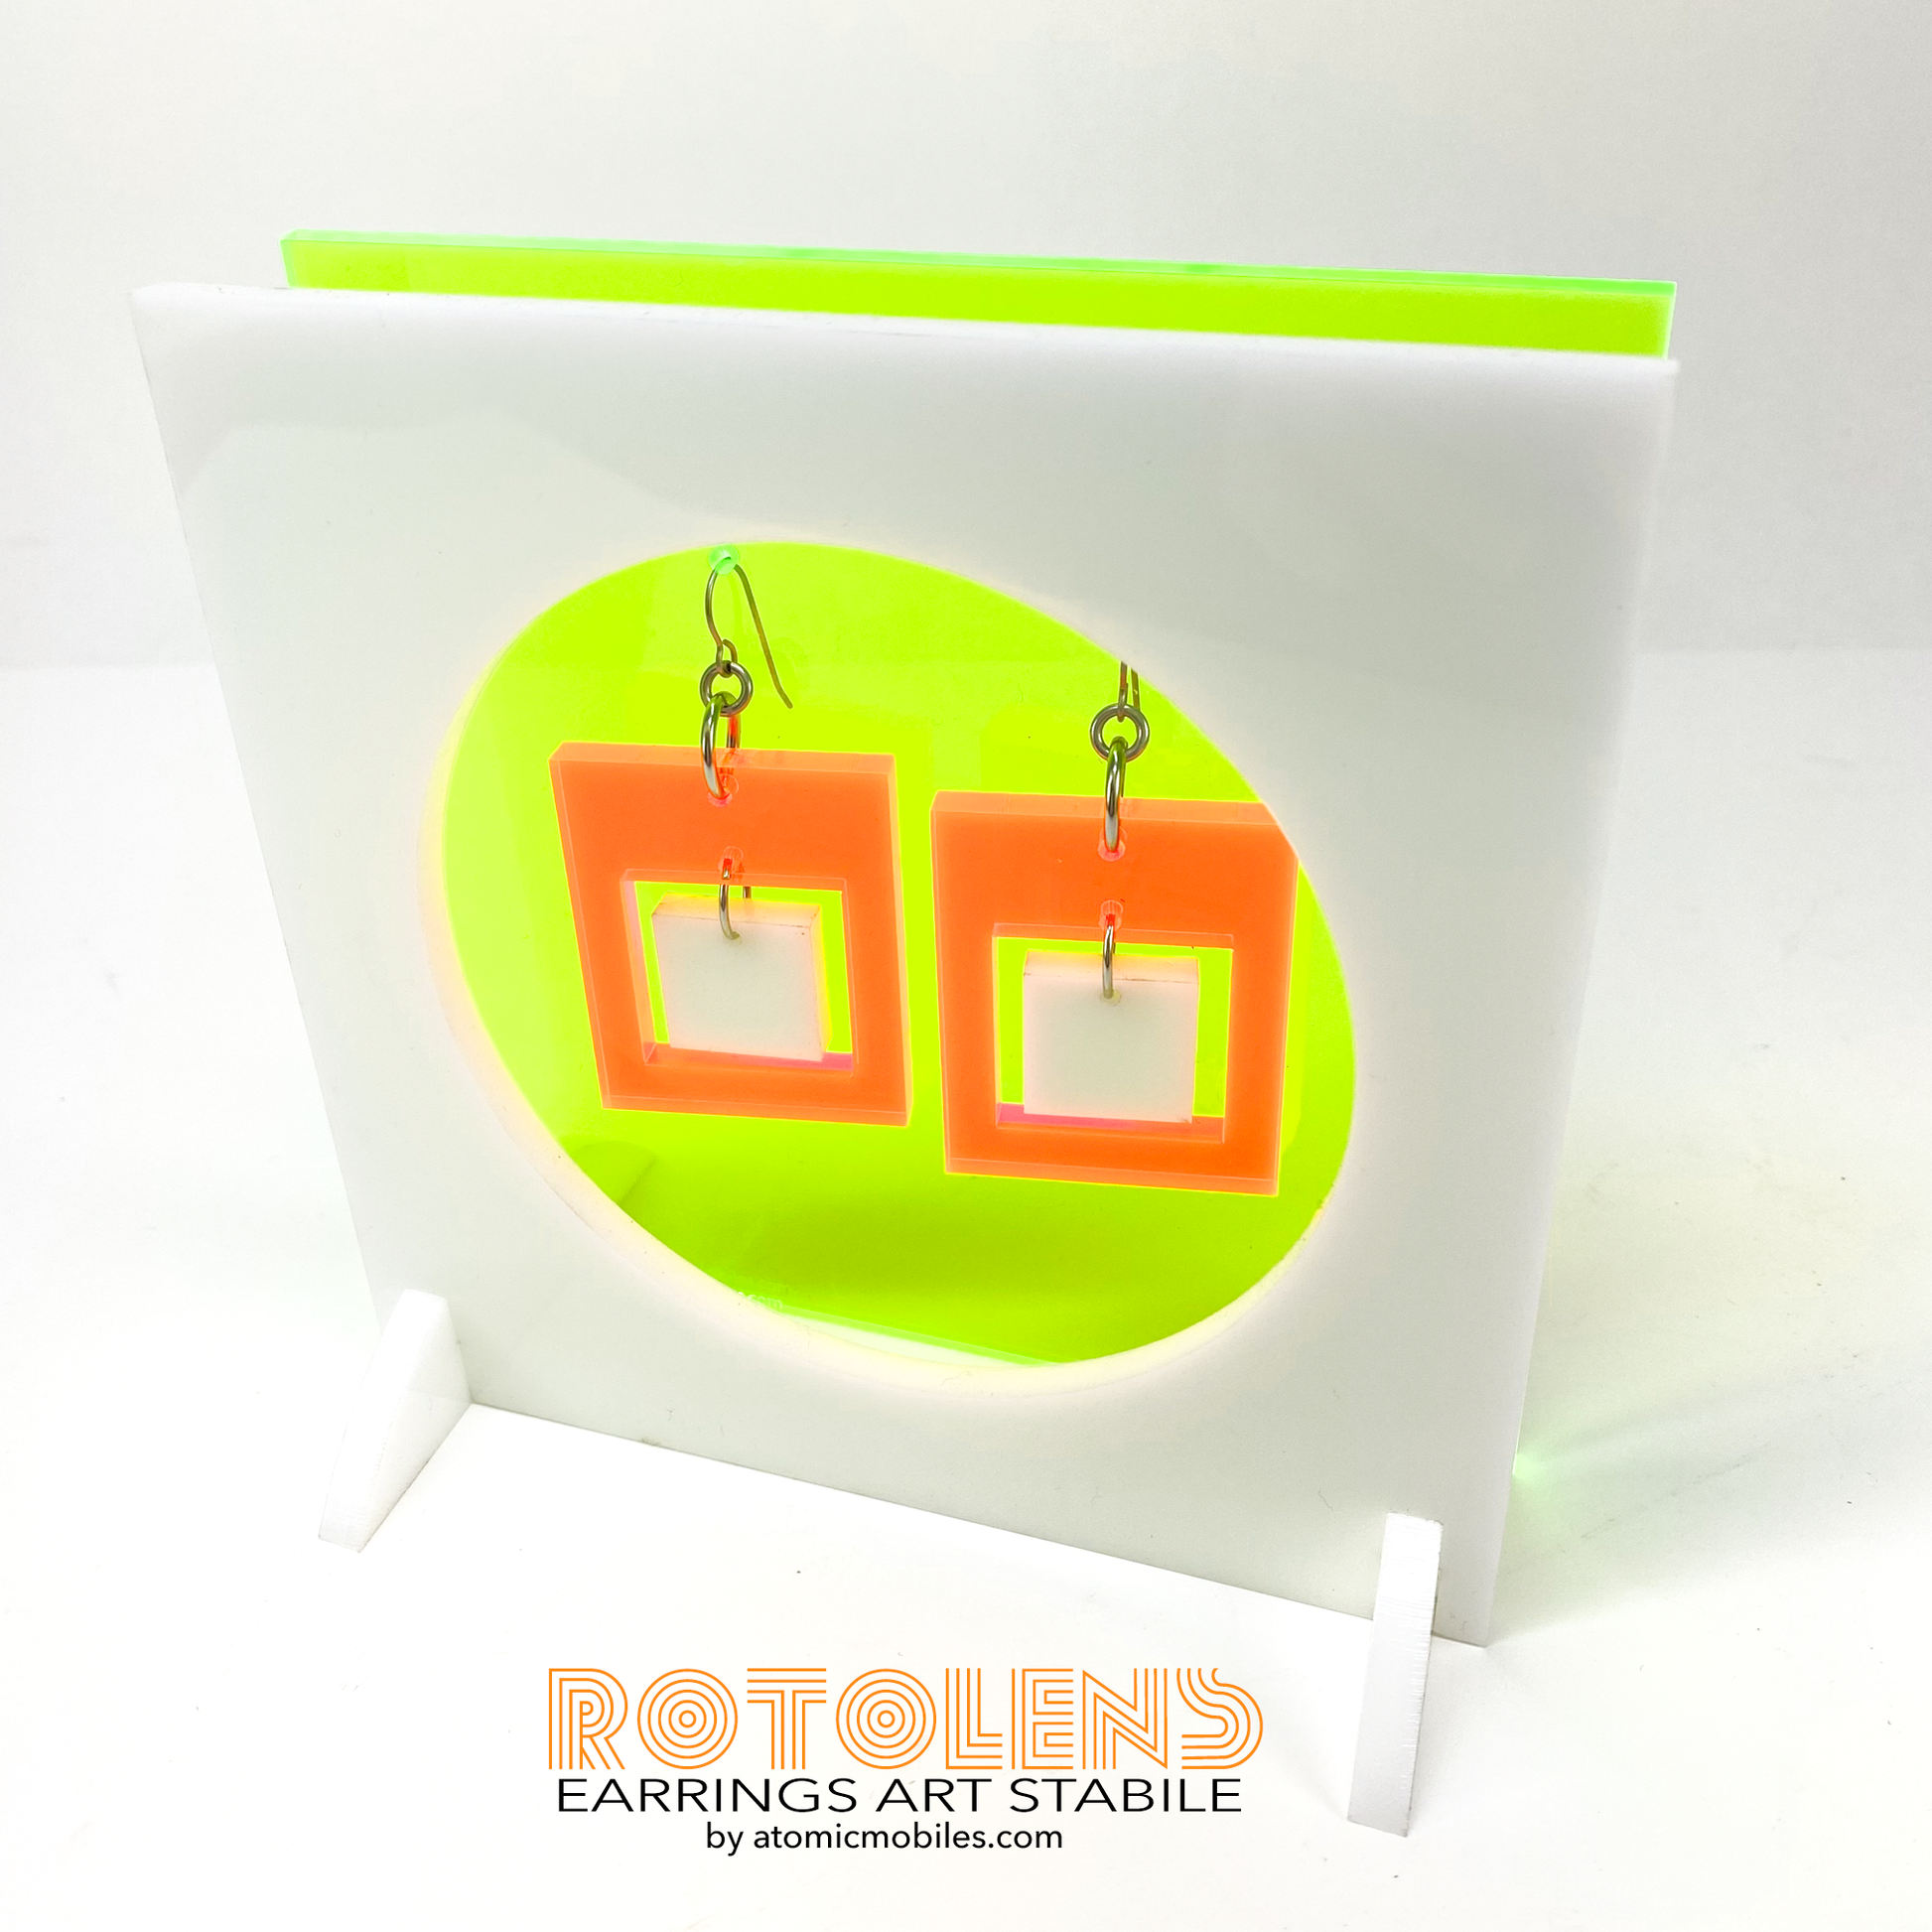 Stunning Art Earrings Stabile Set featuring transparent neon green backing with orange and white earrings - mid century modern art for Groovy People by AtomicMobiles.com